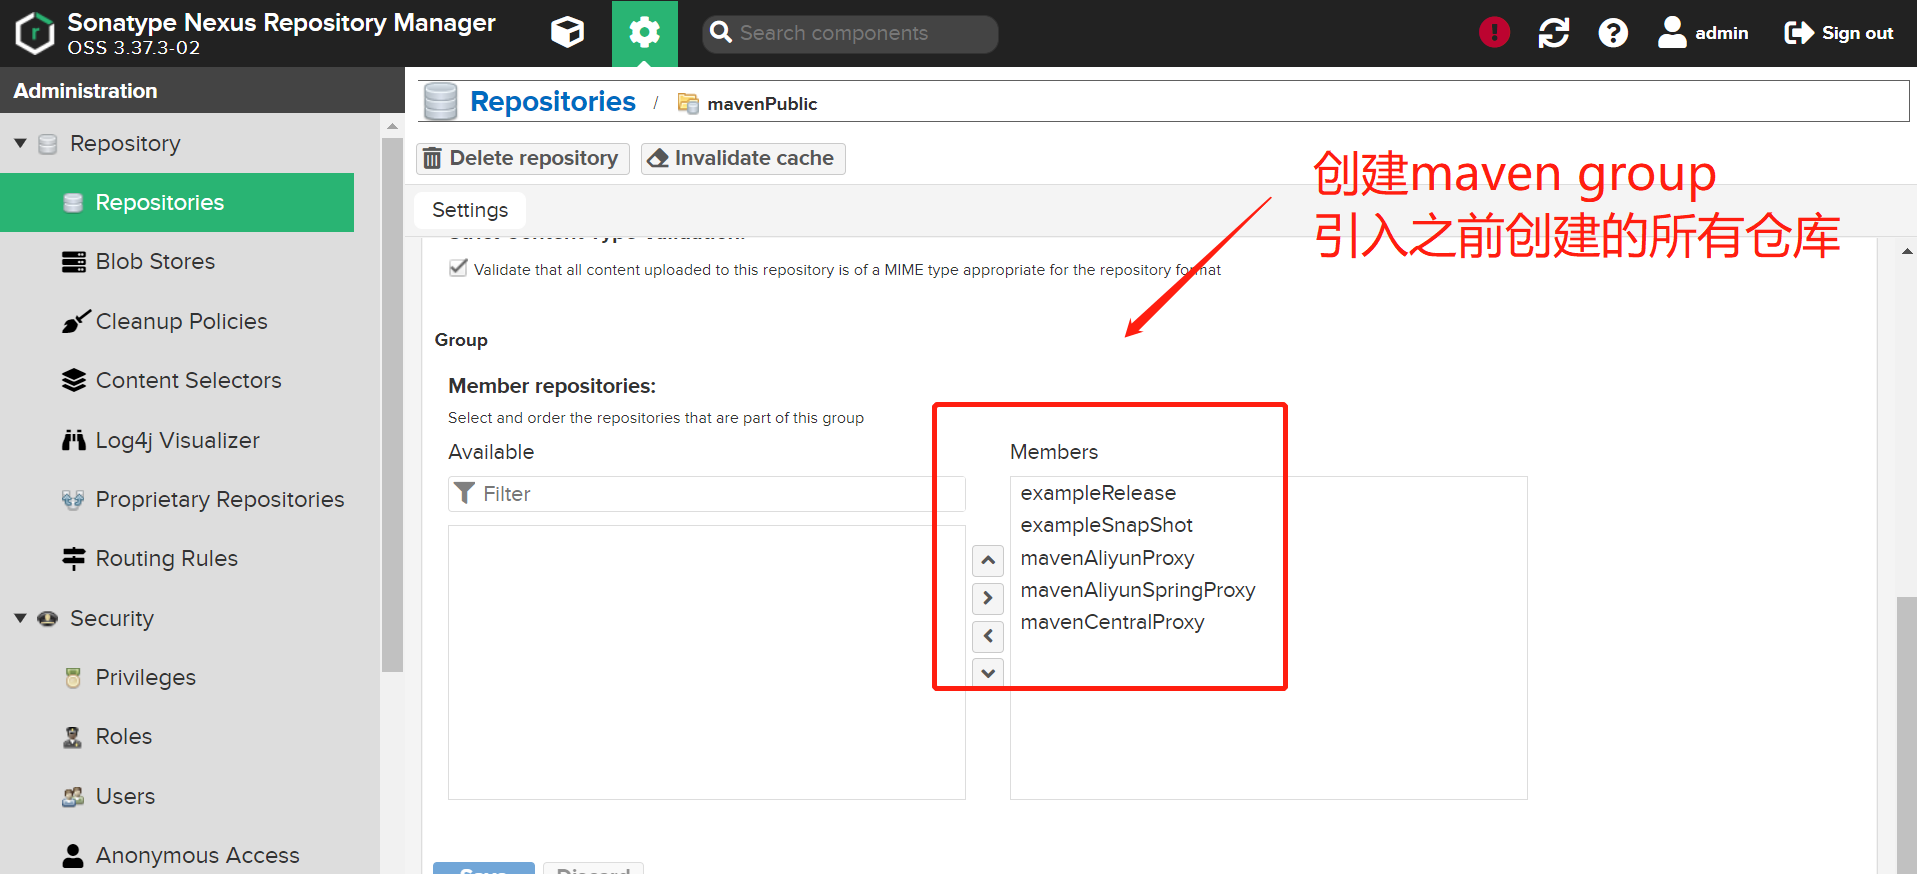 Nexus Repository Manager 3 学习文档 - 图17